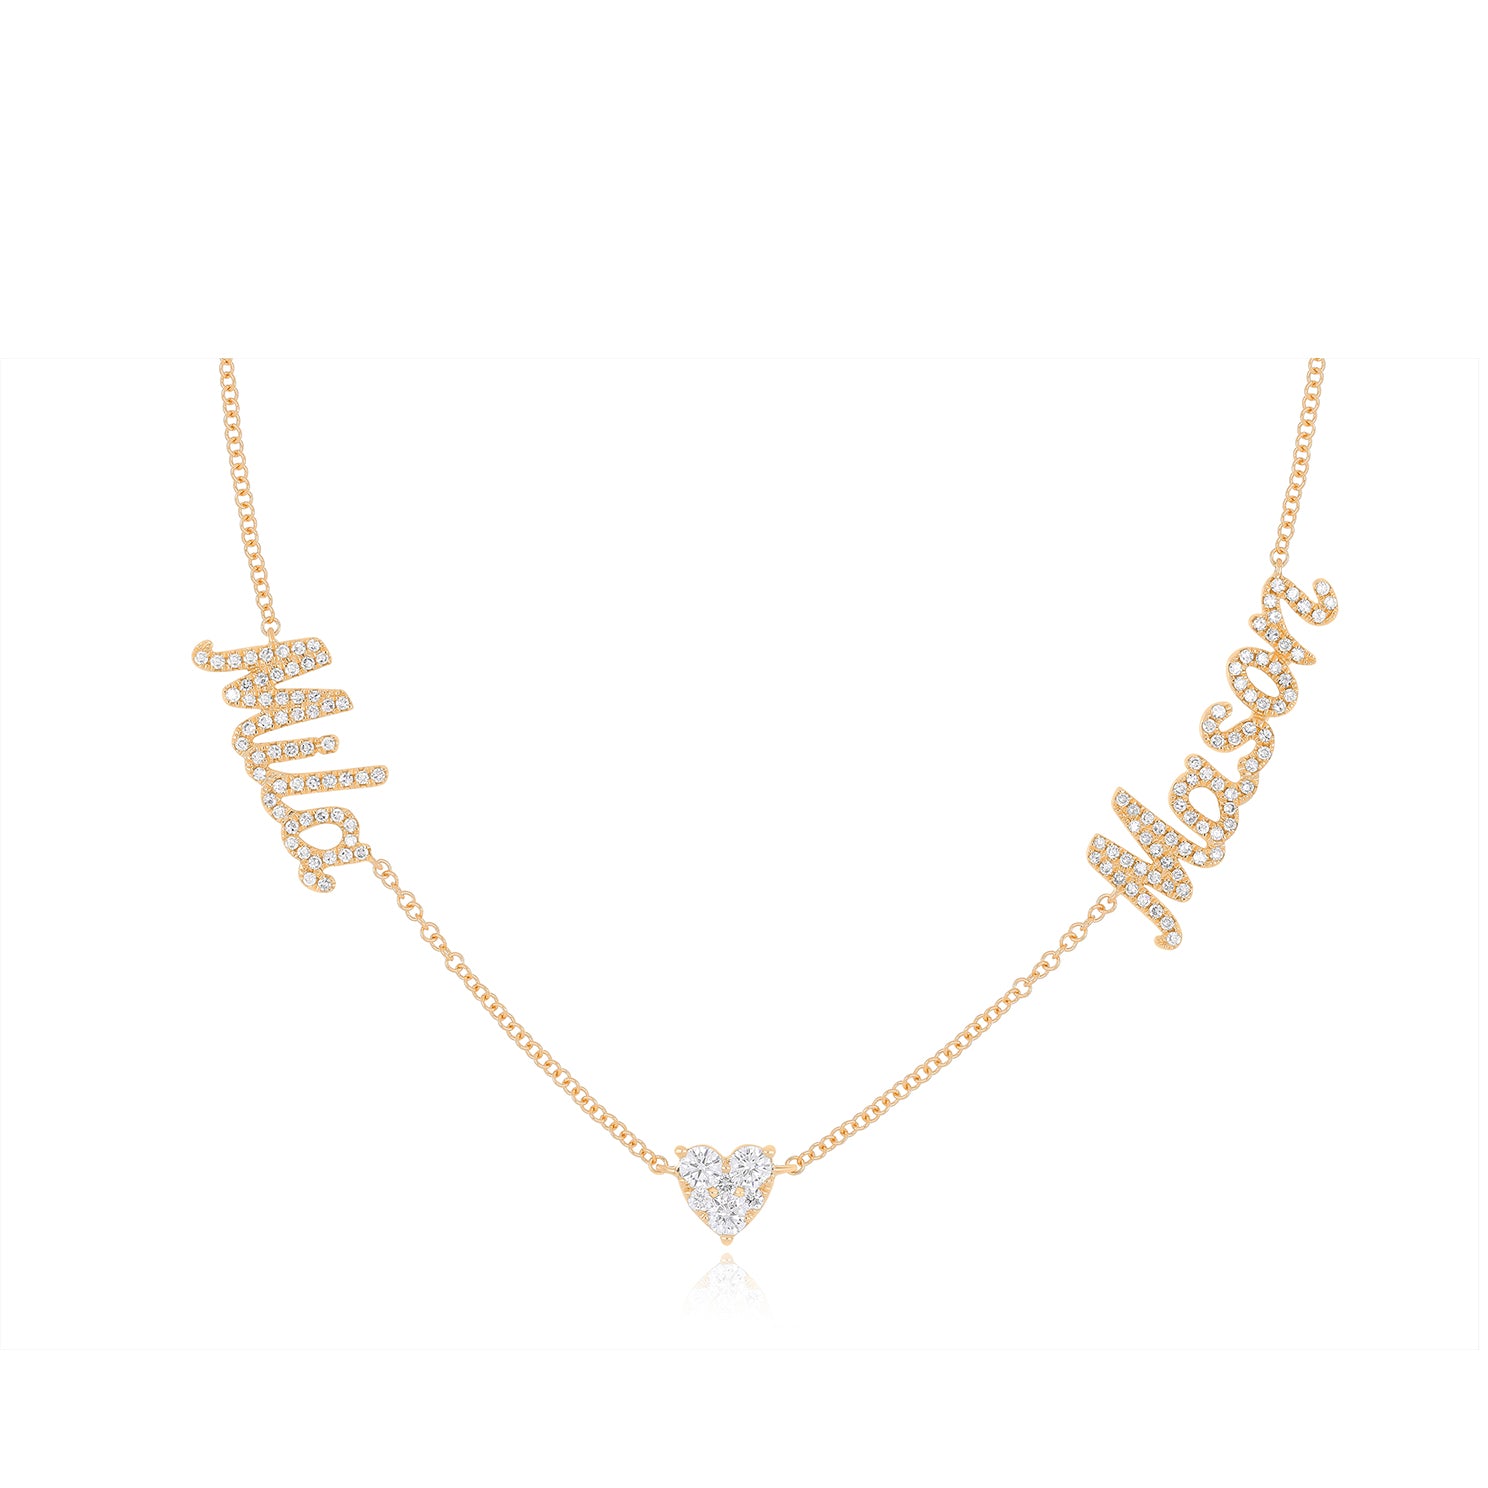 Full Cut Heart Double Diamond Script Name Necklace with names Mila and Mason with heart in the middle of necklace in 14k rose gold